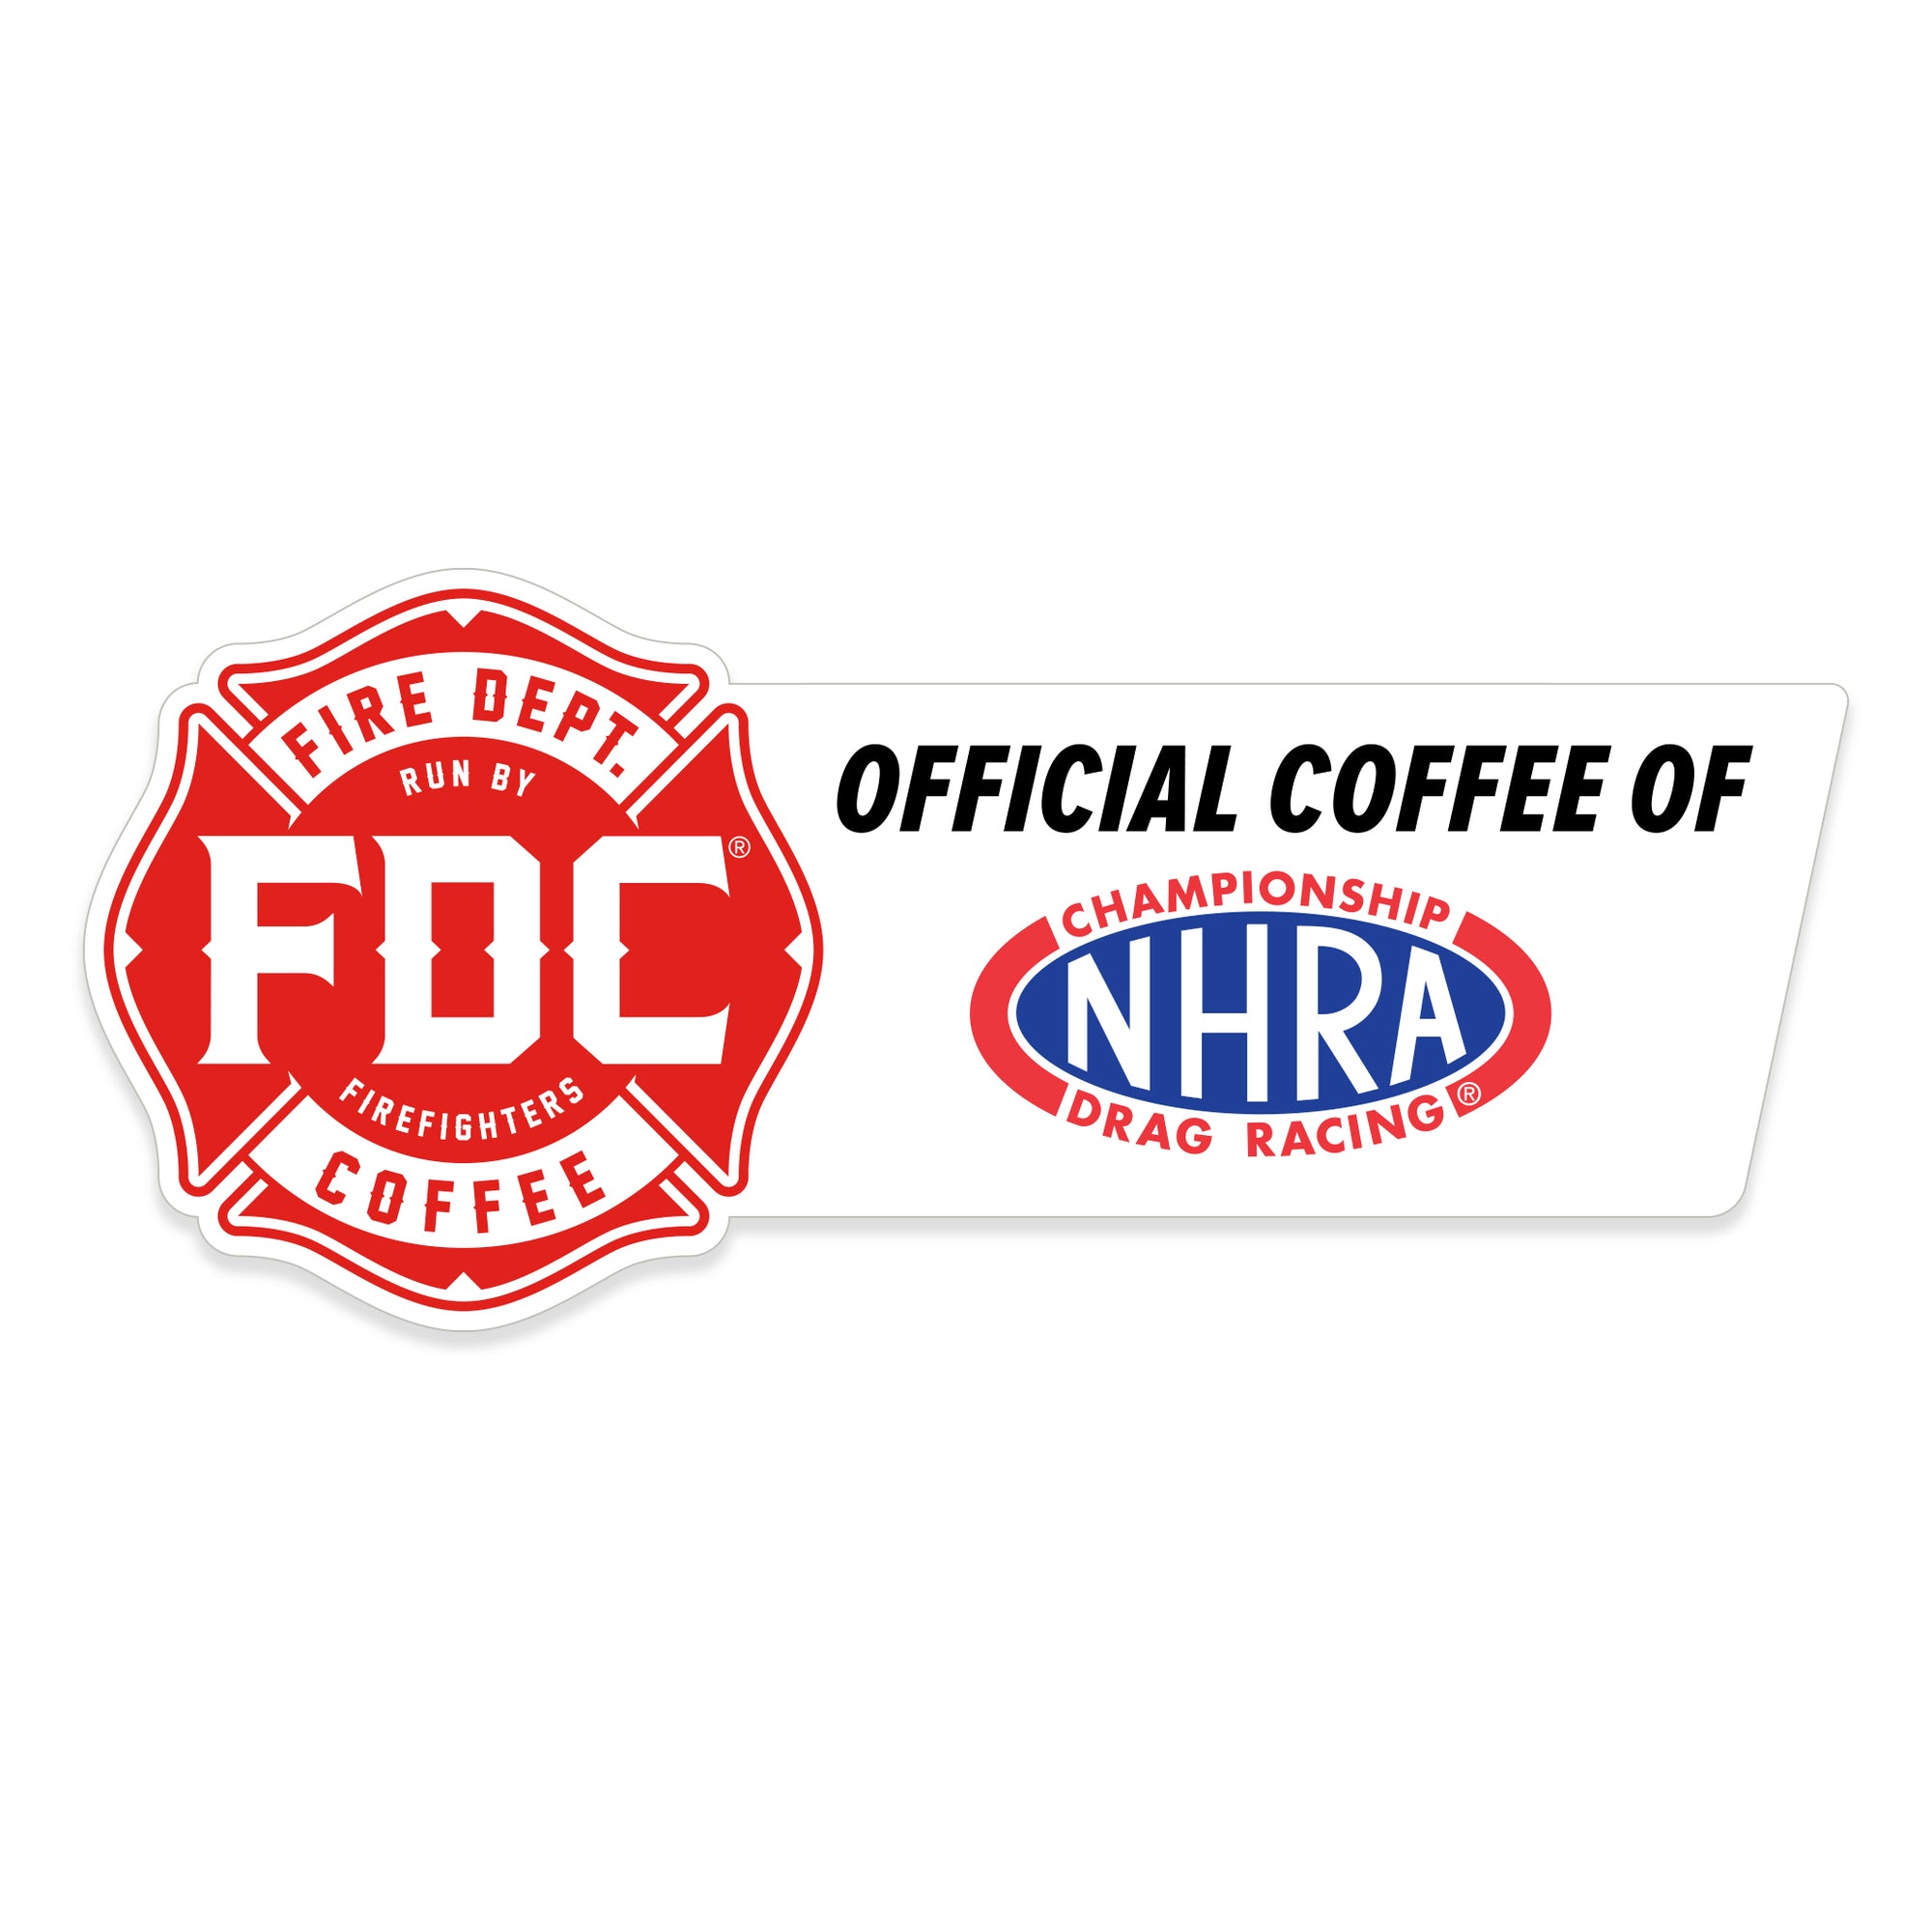 OFFICIAL COFFEE OF THE NHRA STICKER